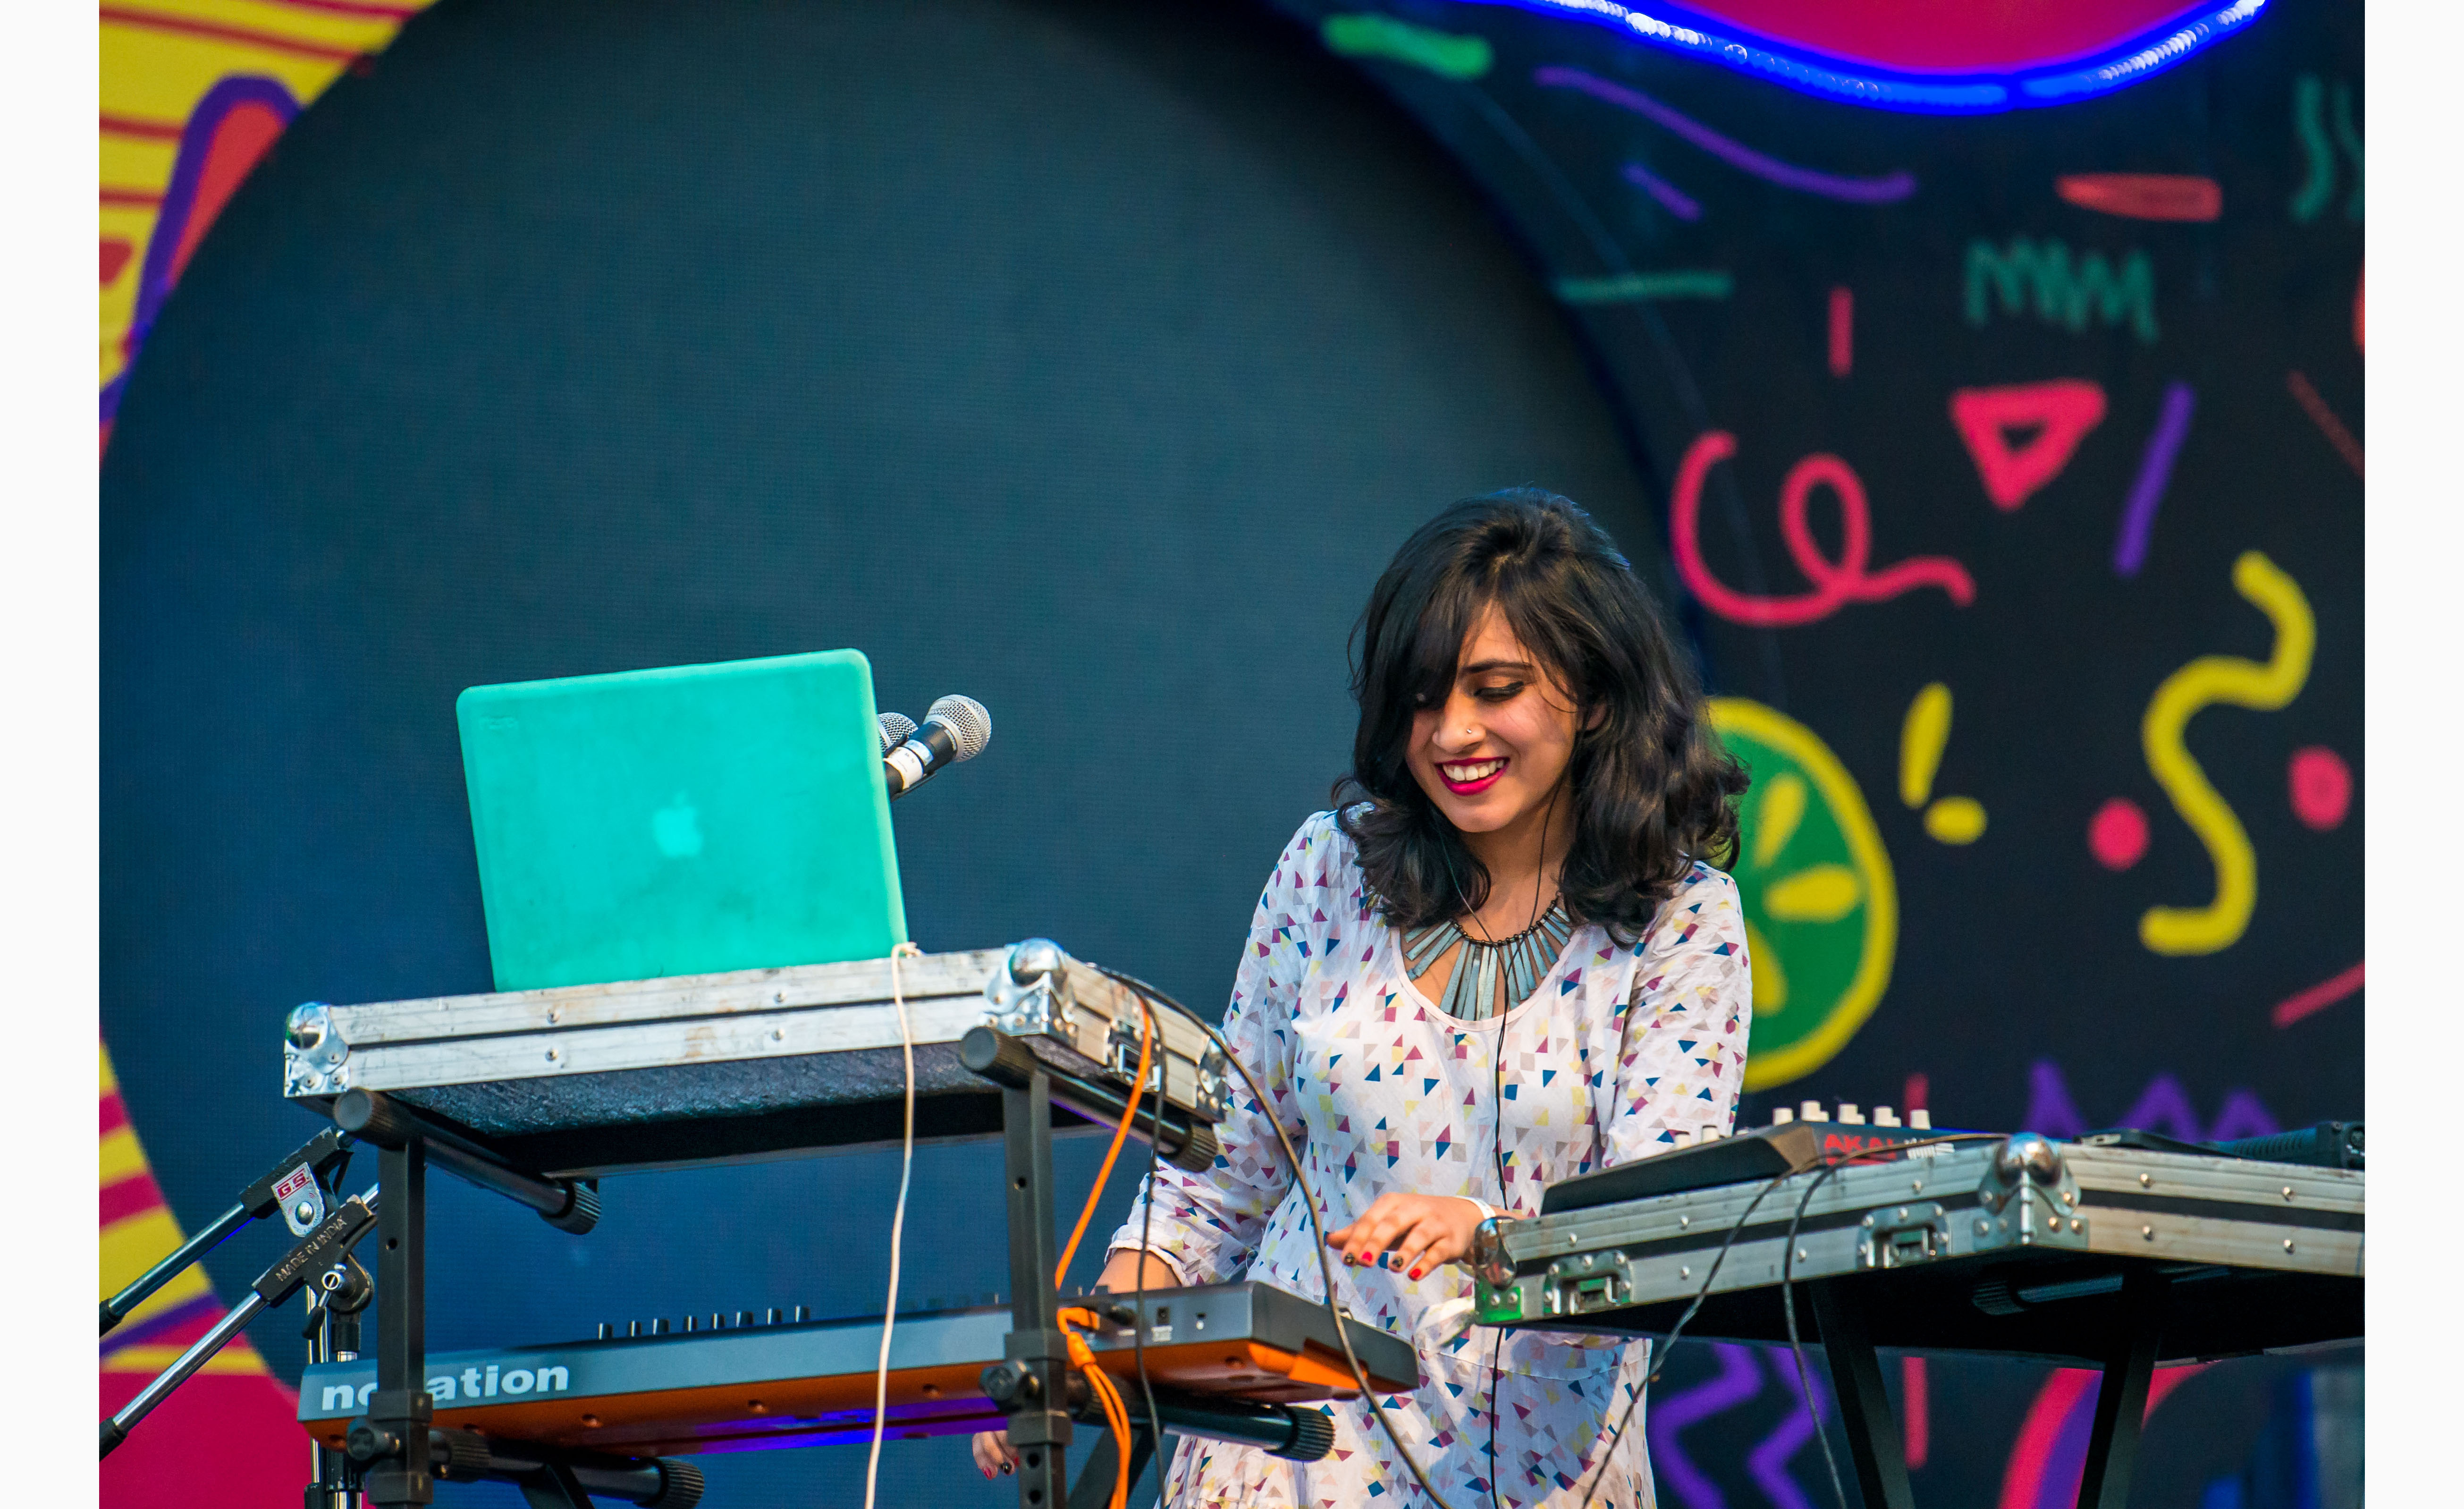  Komorebi performing on Day One of the Pune edition of BACARDI NH7 Weekender. Photo Credit - Clique Photography